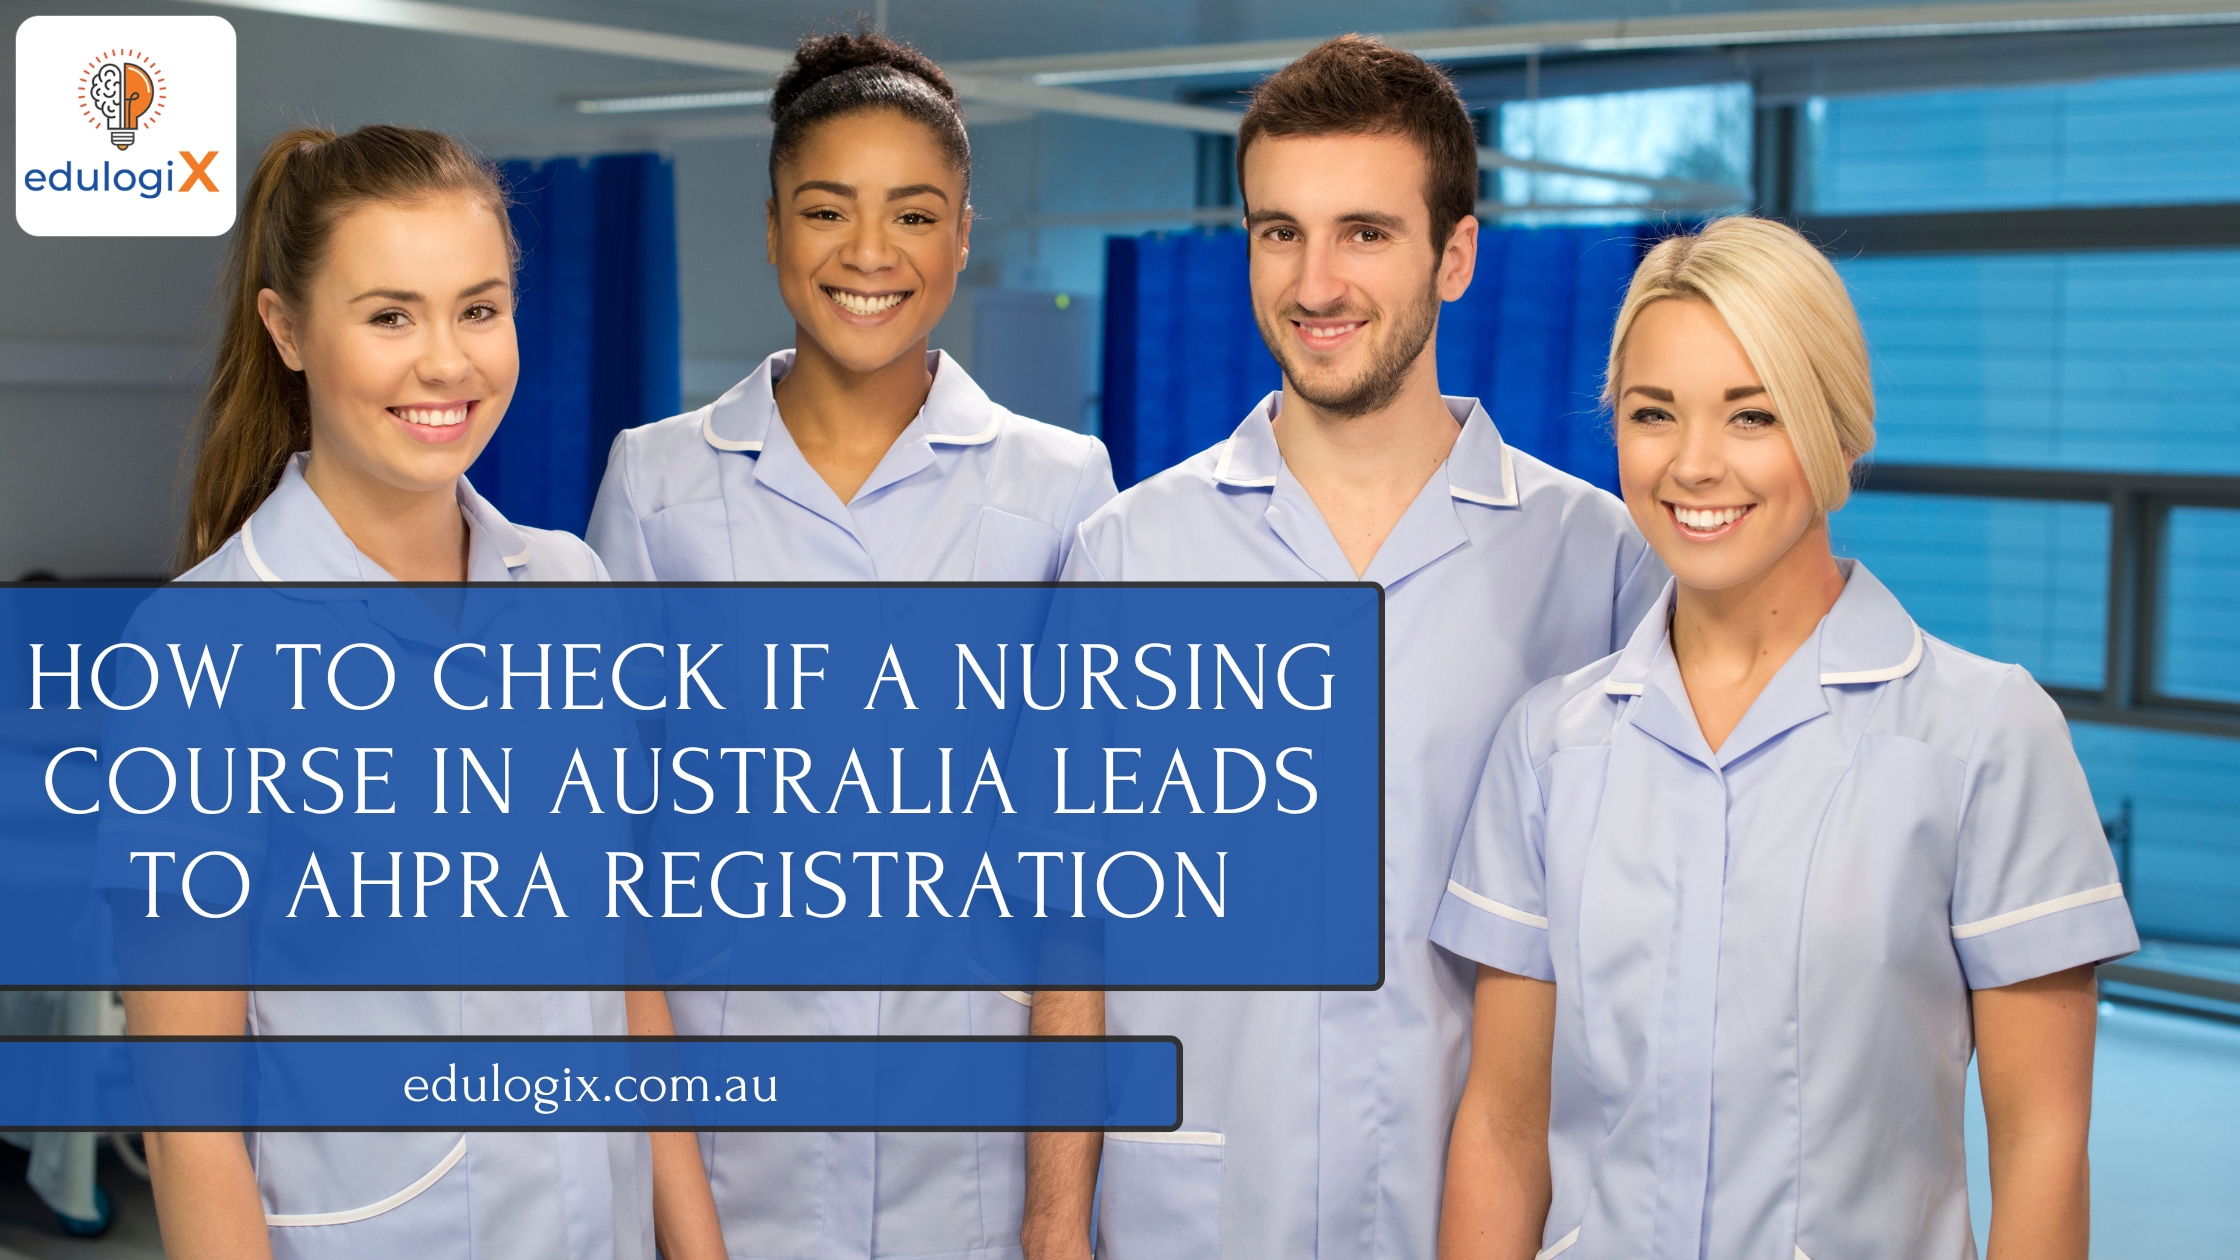 Ensuring AHPRA and NMBA Registration for Your Australian Nursing Course